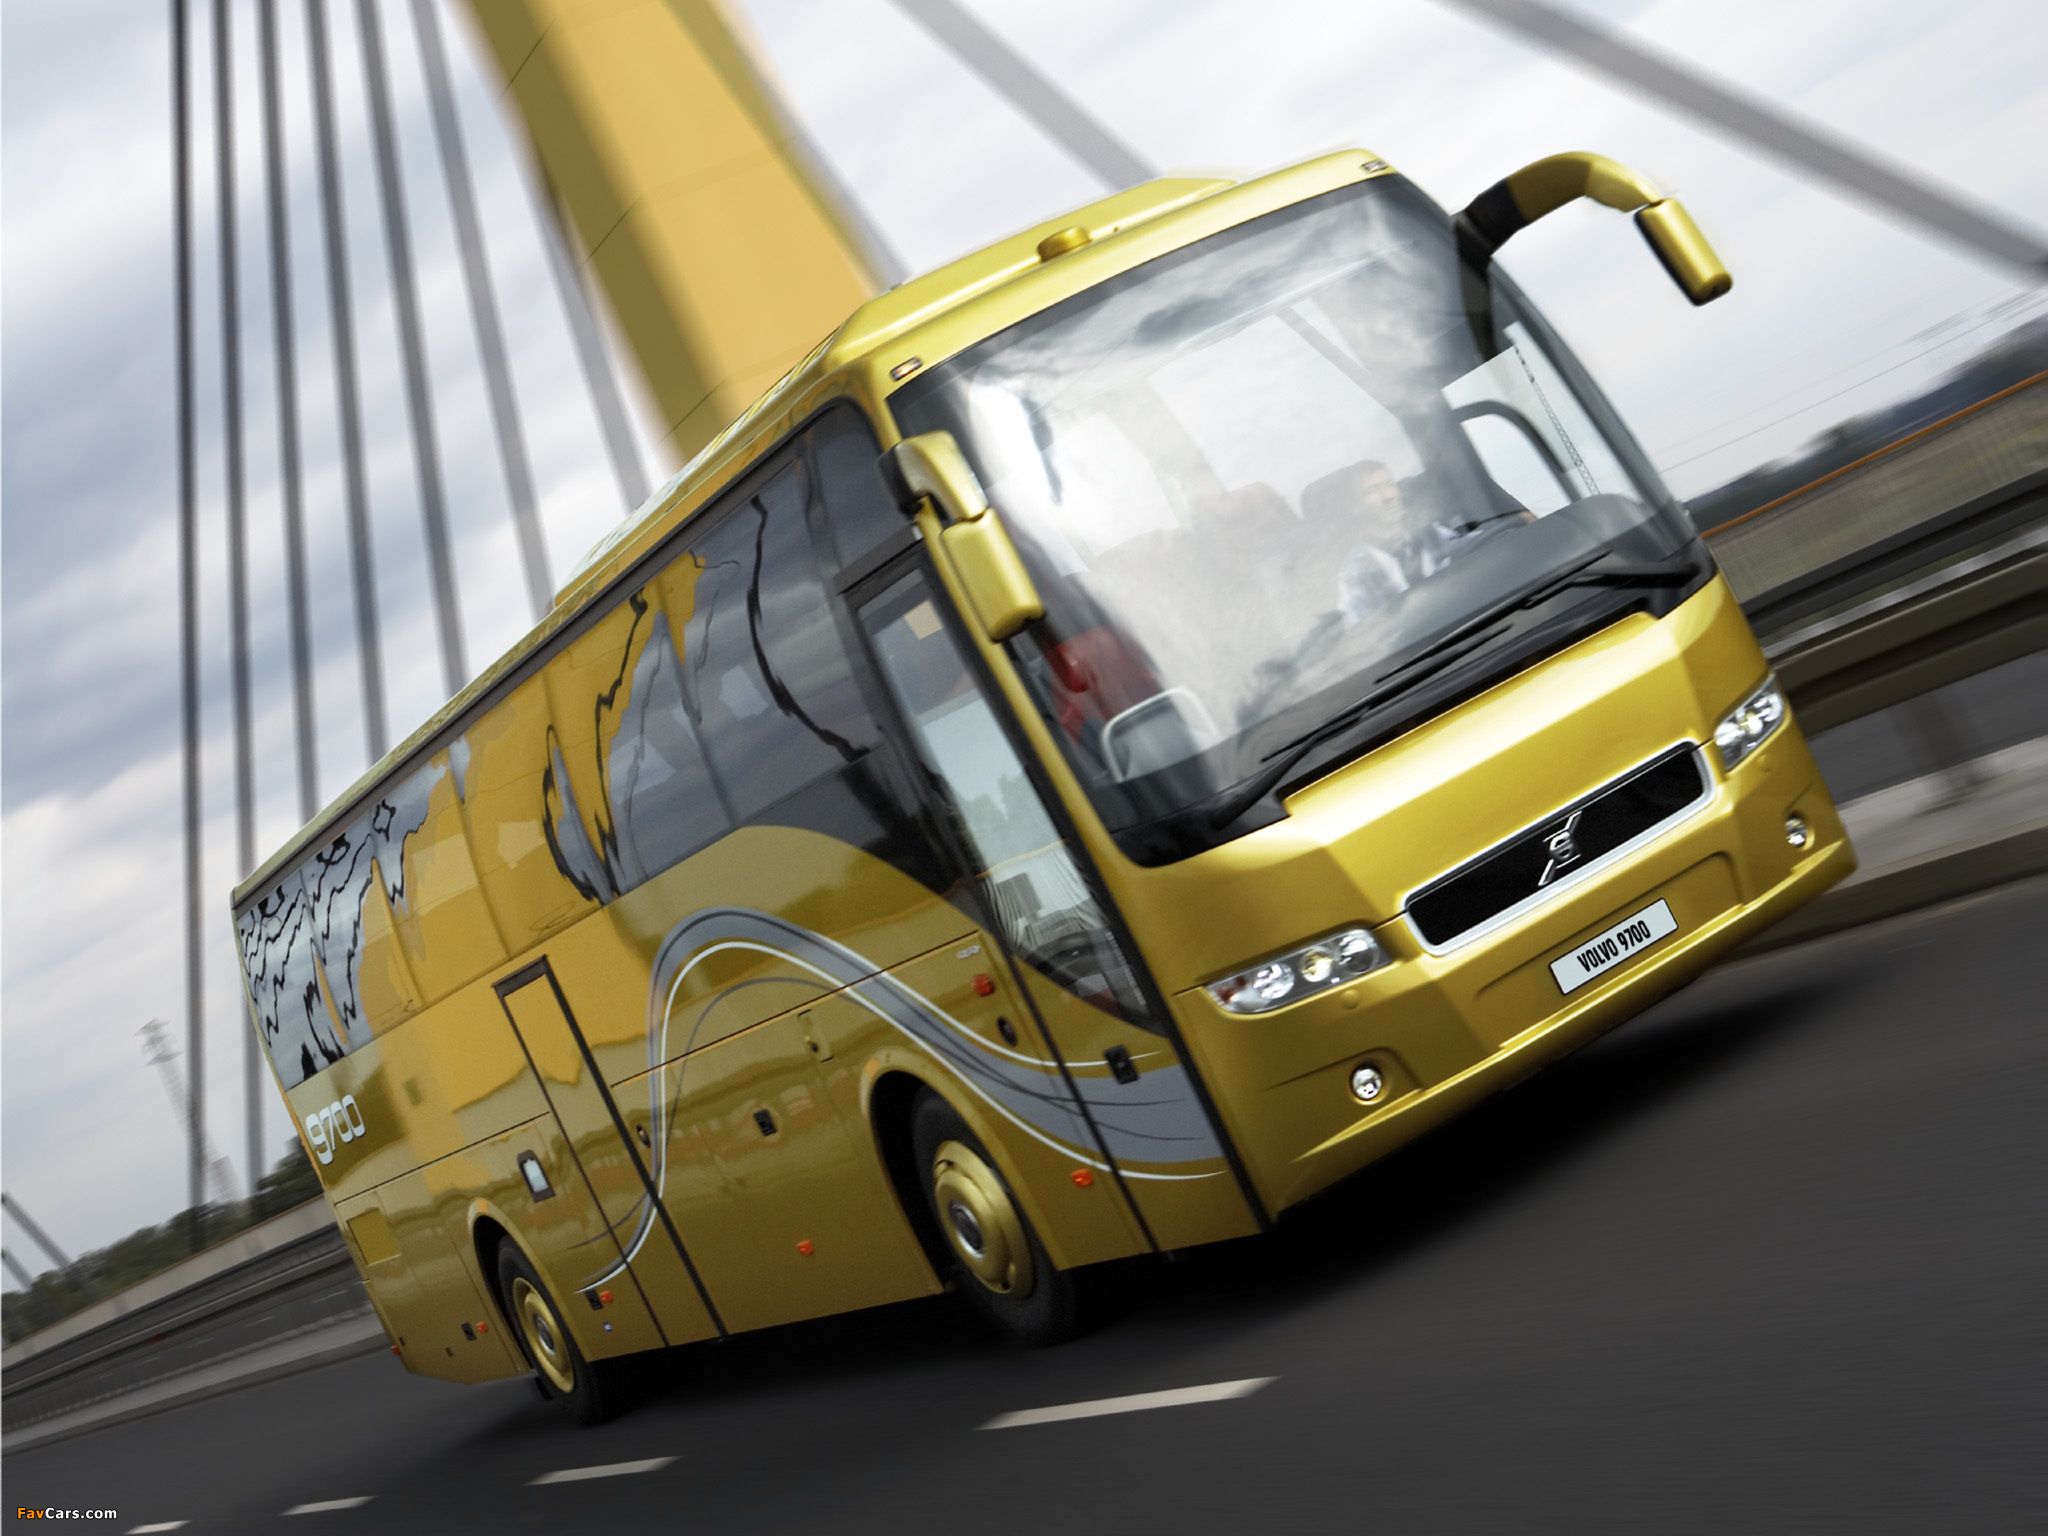 Volvo launches new program for long-distance coaches